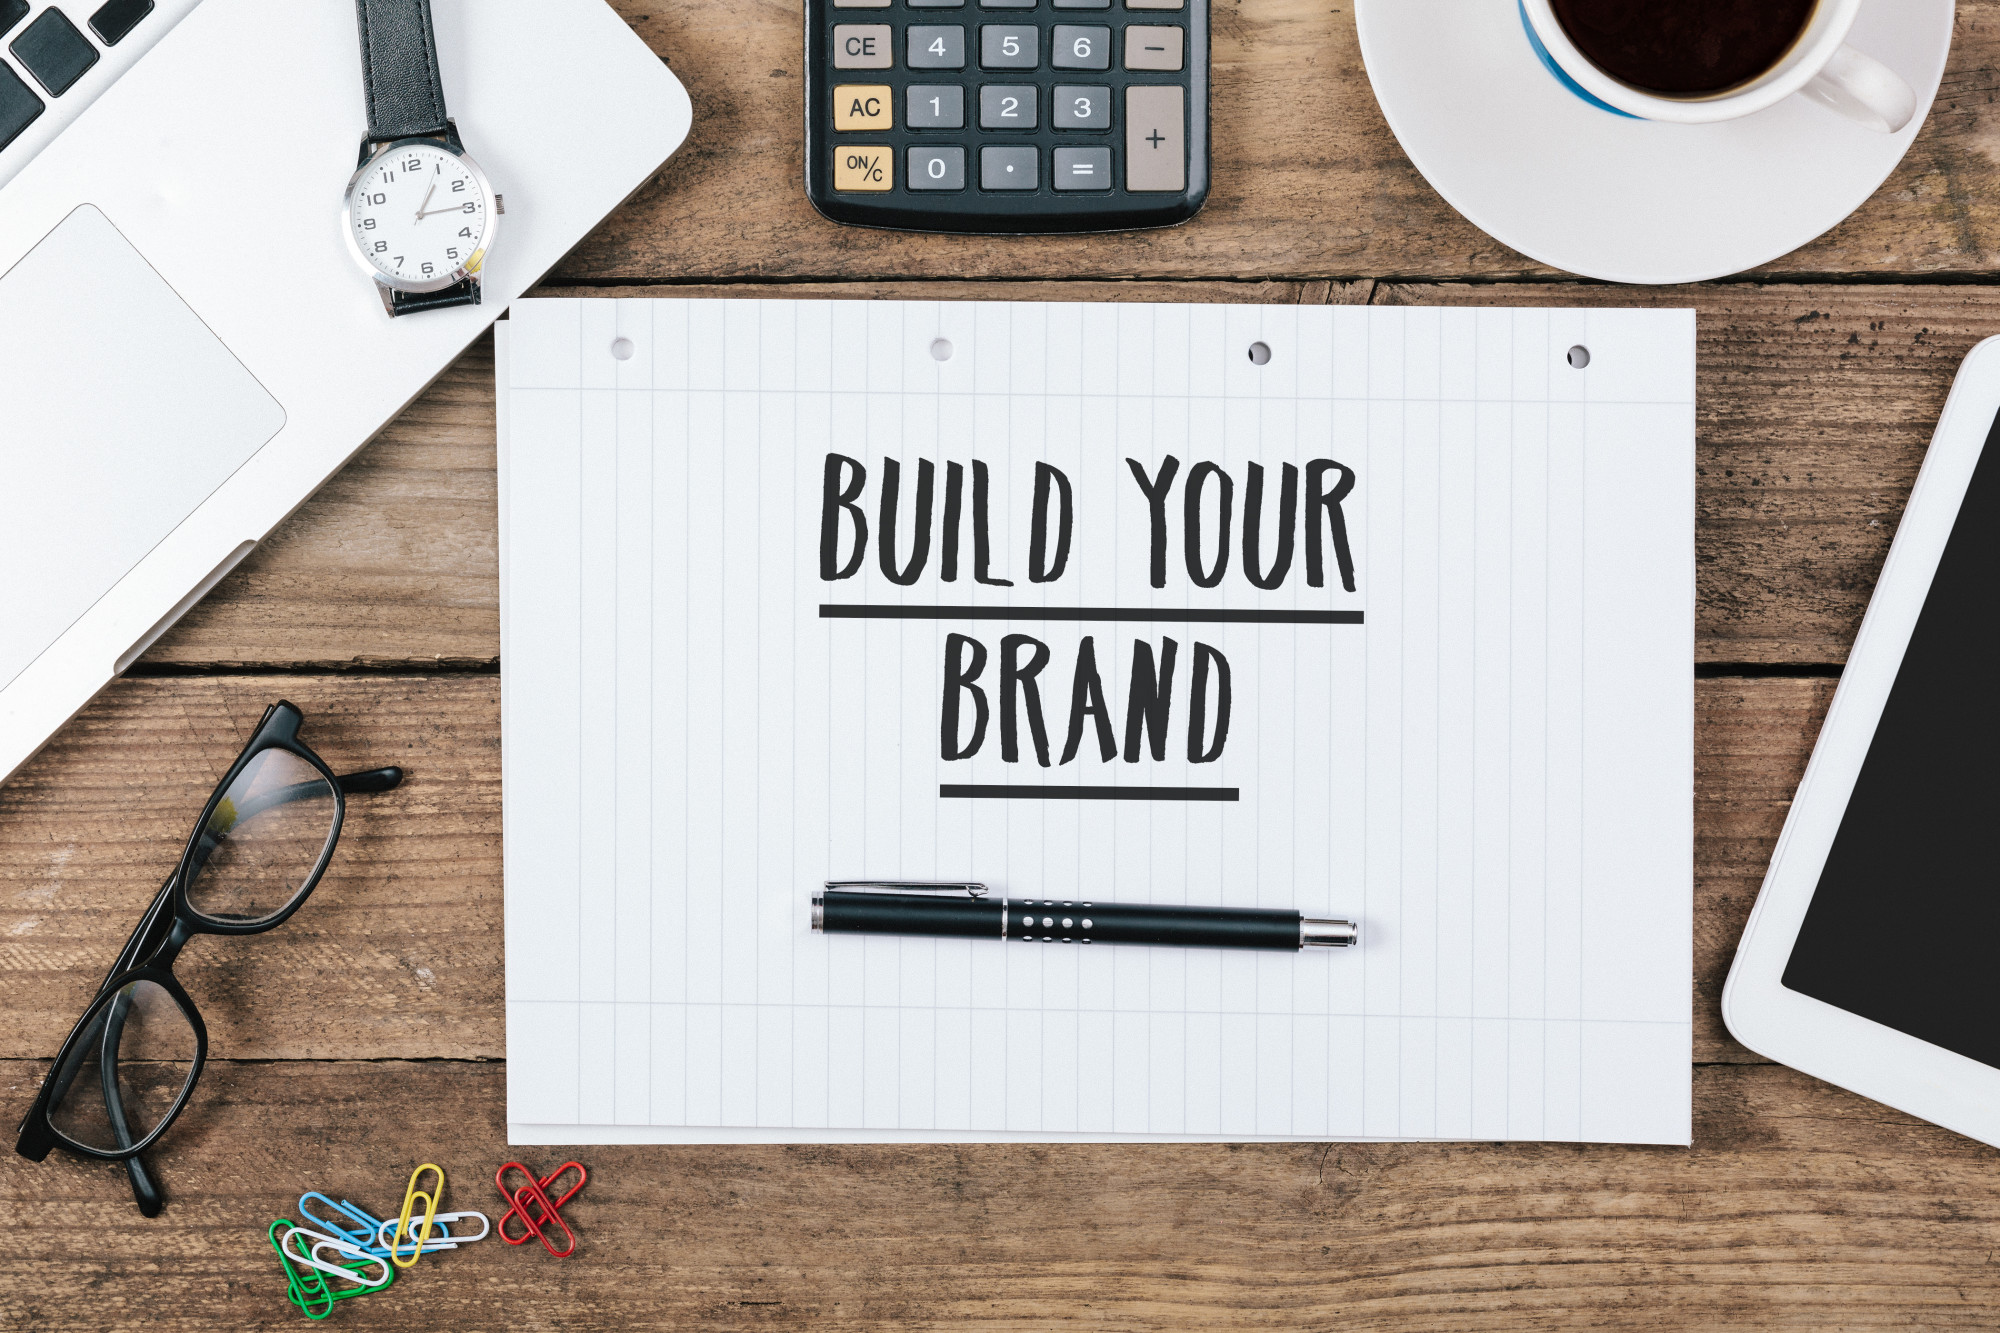 How to Build a Brand for Your Business: 5 Quick Tips